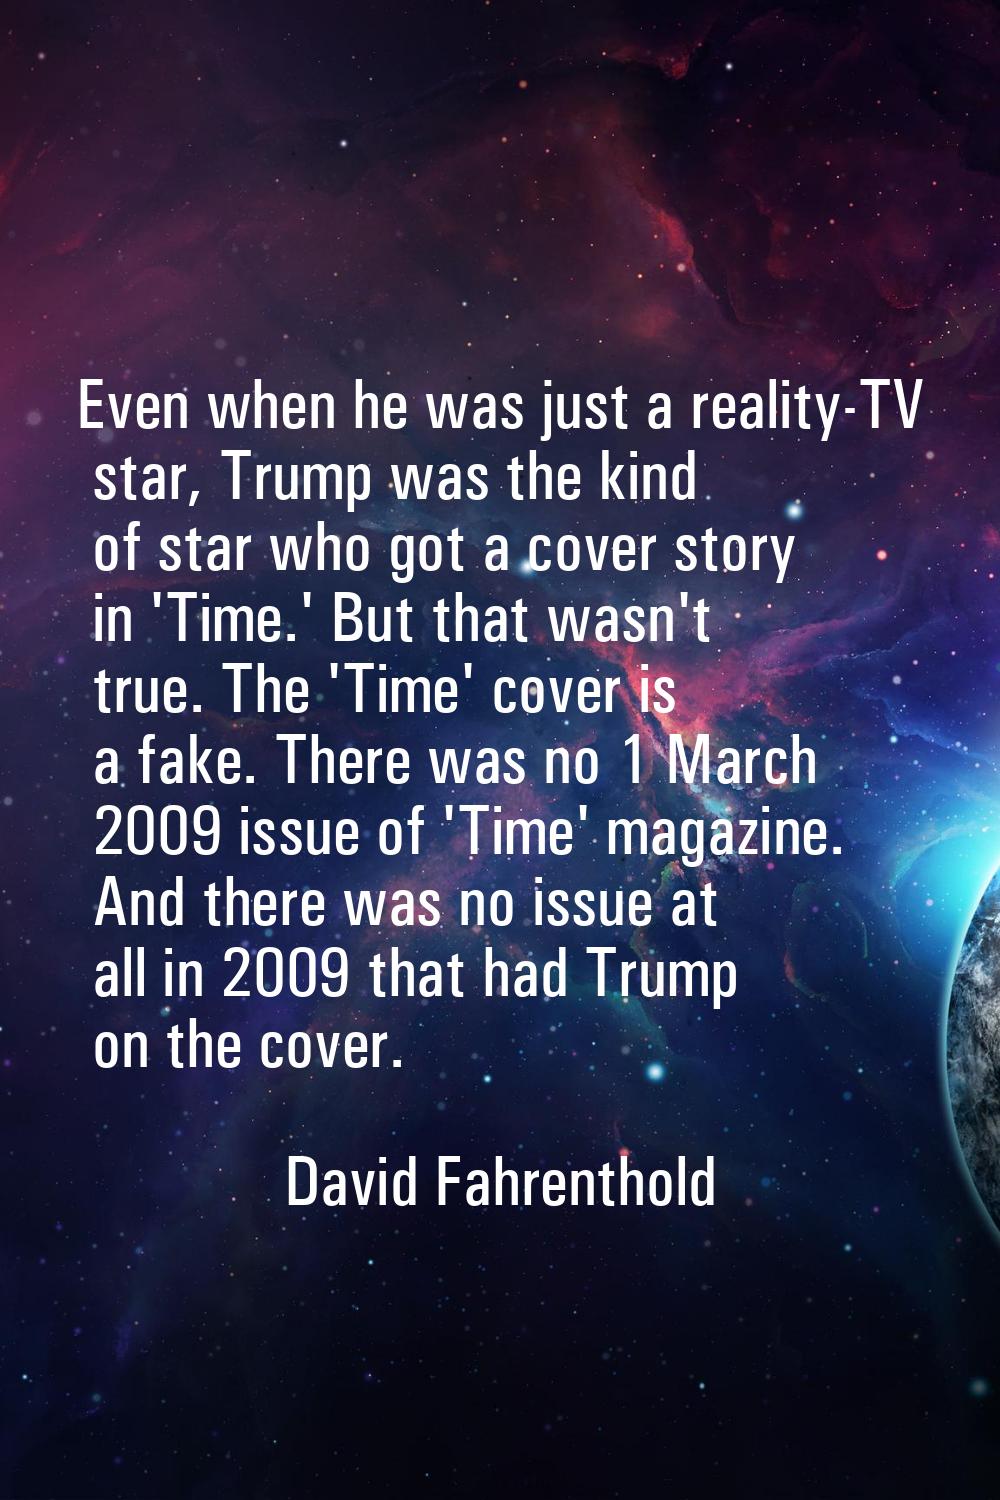 Even when he was just a reality-TV star, Trump was the kind of star who got a cover story in 'Time.